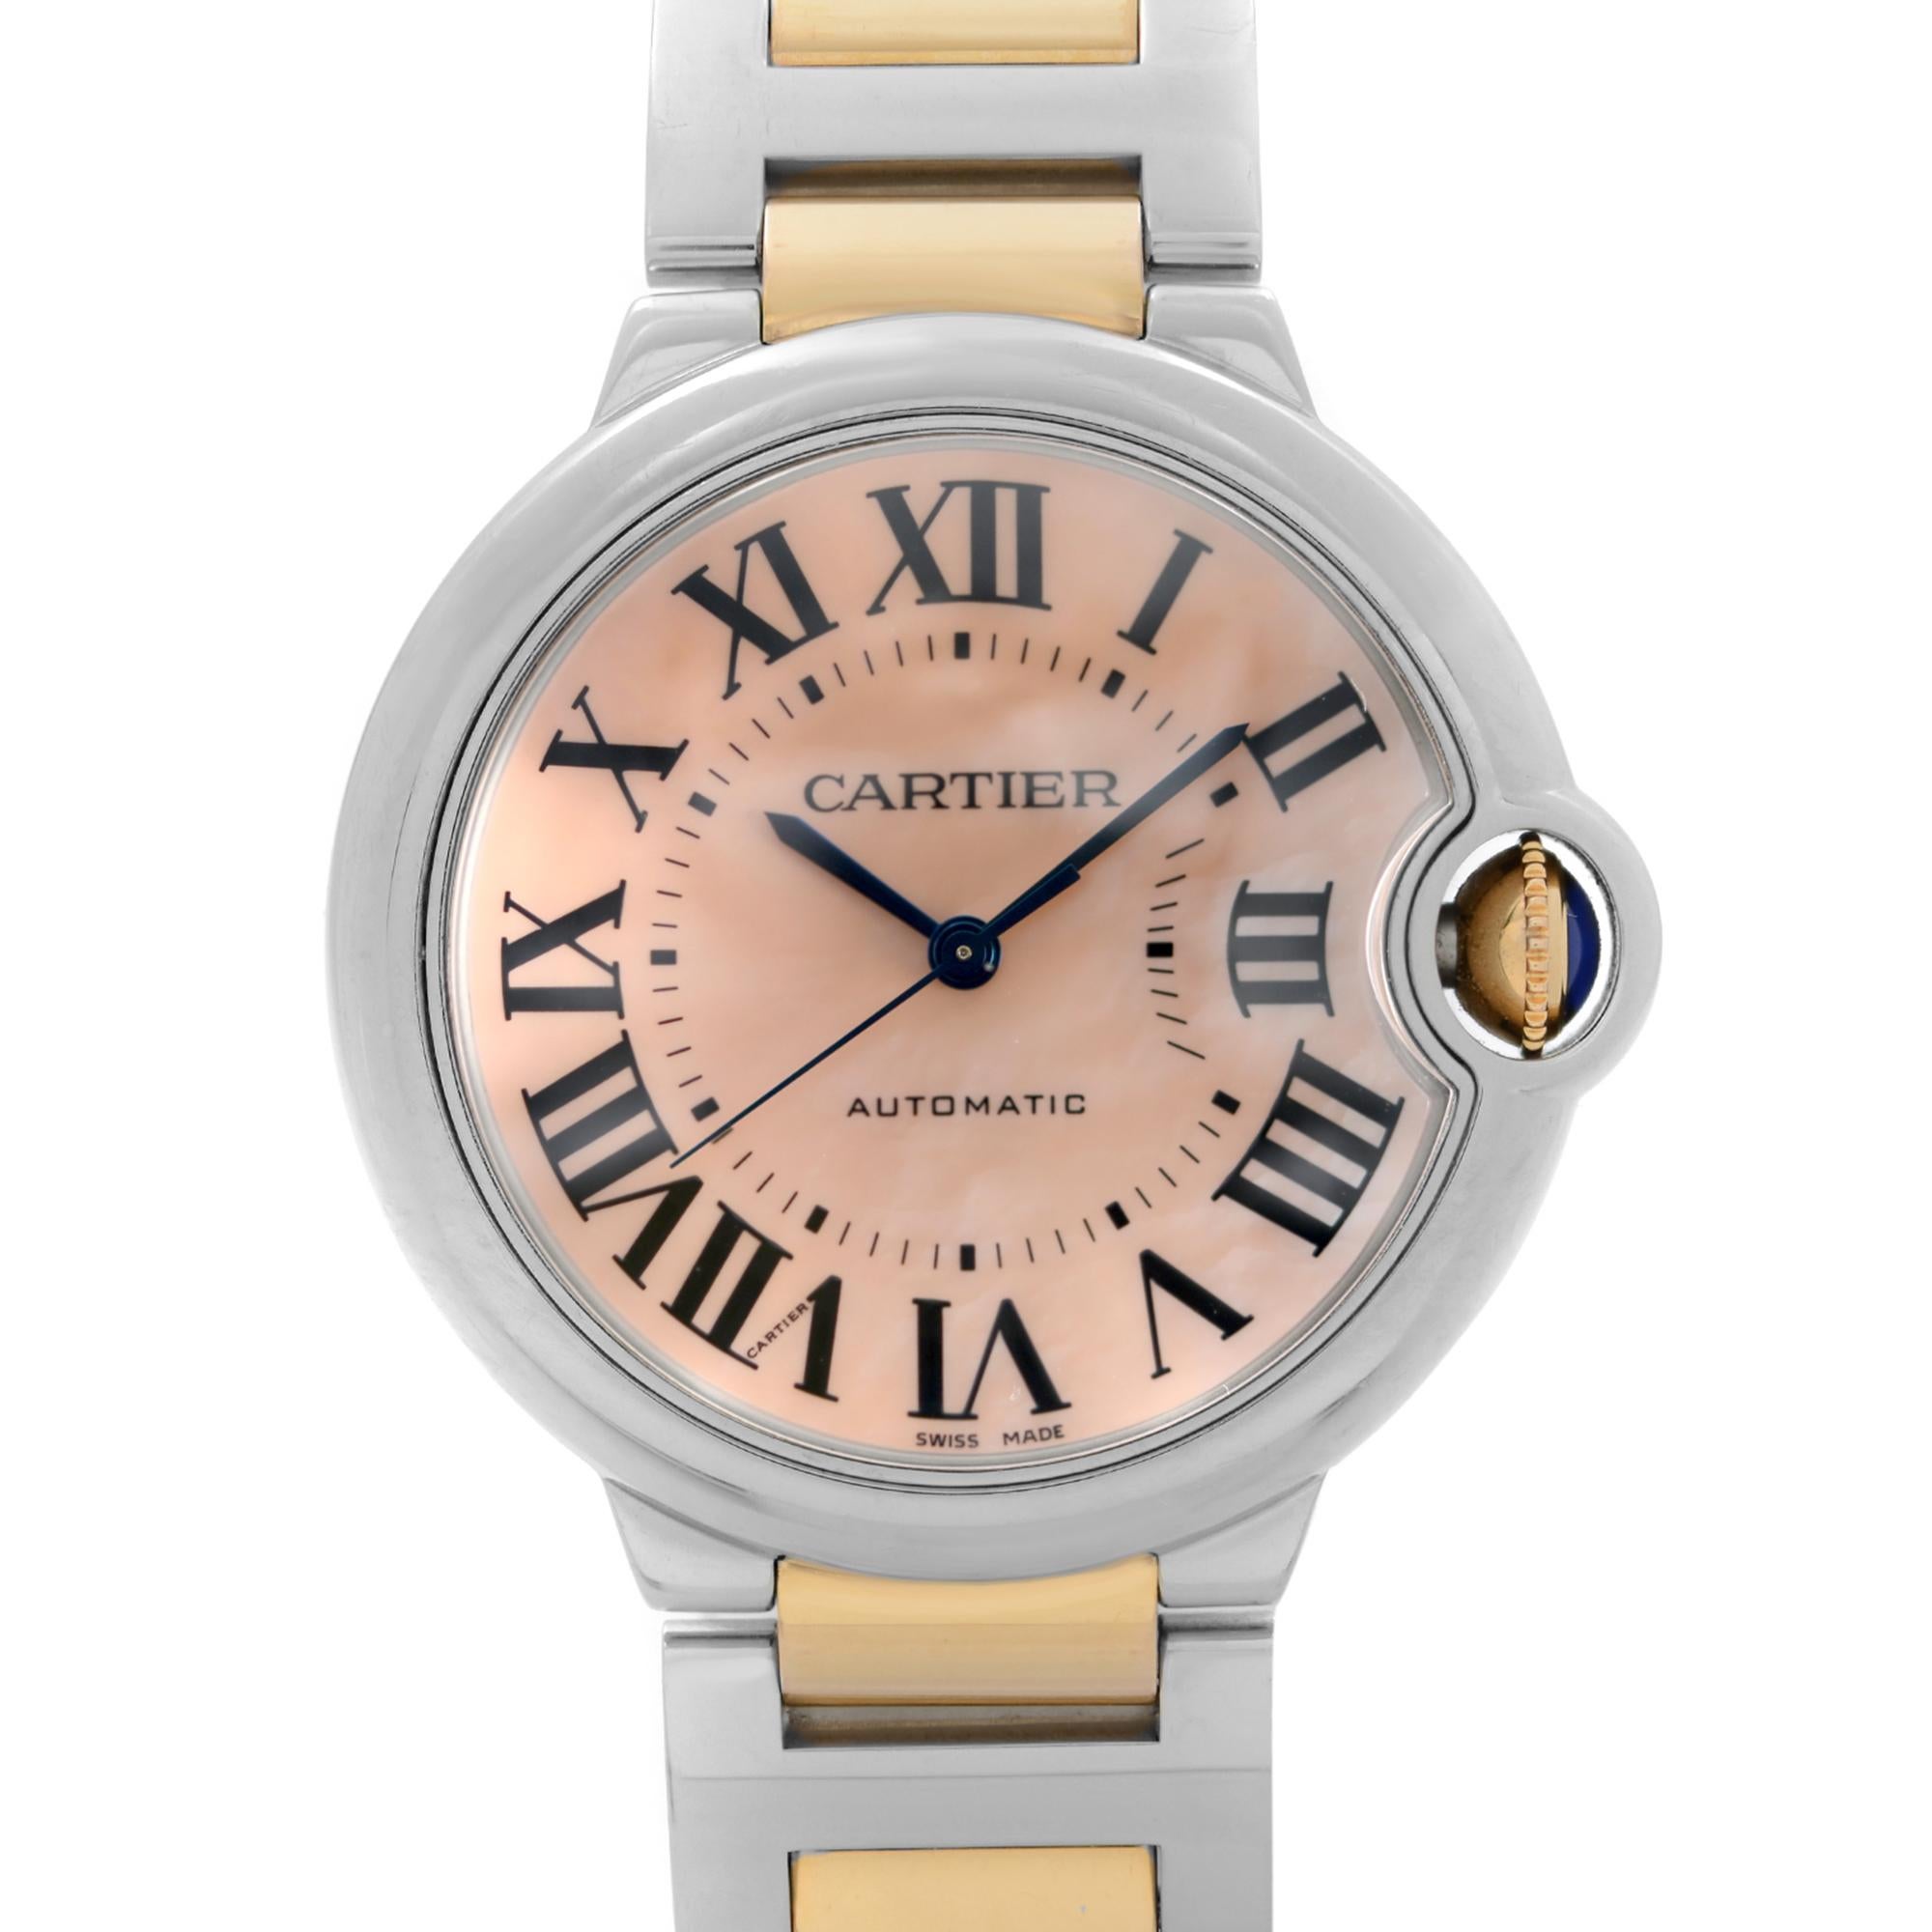 Pre-Owned Cartier Ballon Bleu 36mm Rose Gold Stainless Steel Pink Mother of Pearl Dial Ladies Automatic Watch W6920033. The Watch is empowered by an Automatic Movement. This Beautiful Timepiece Features: Polished Stainless Steel Case and Crown